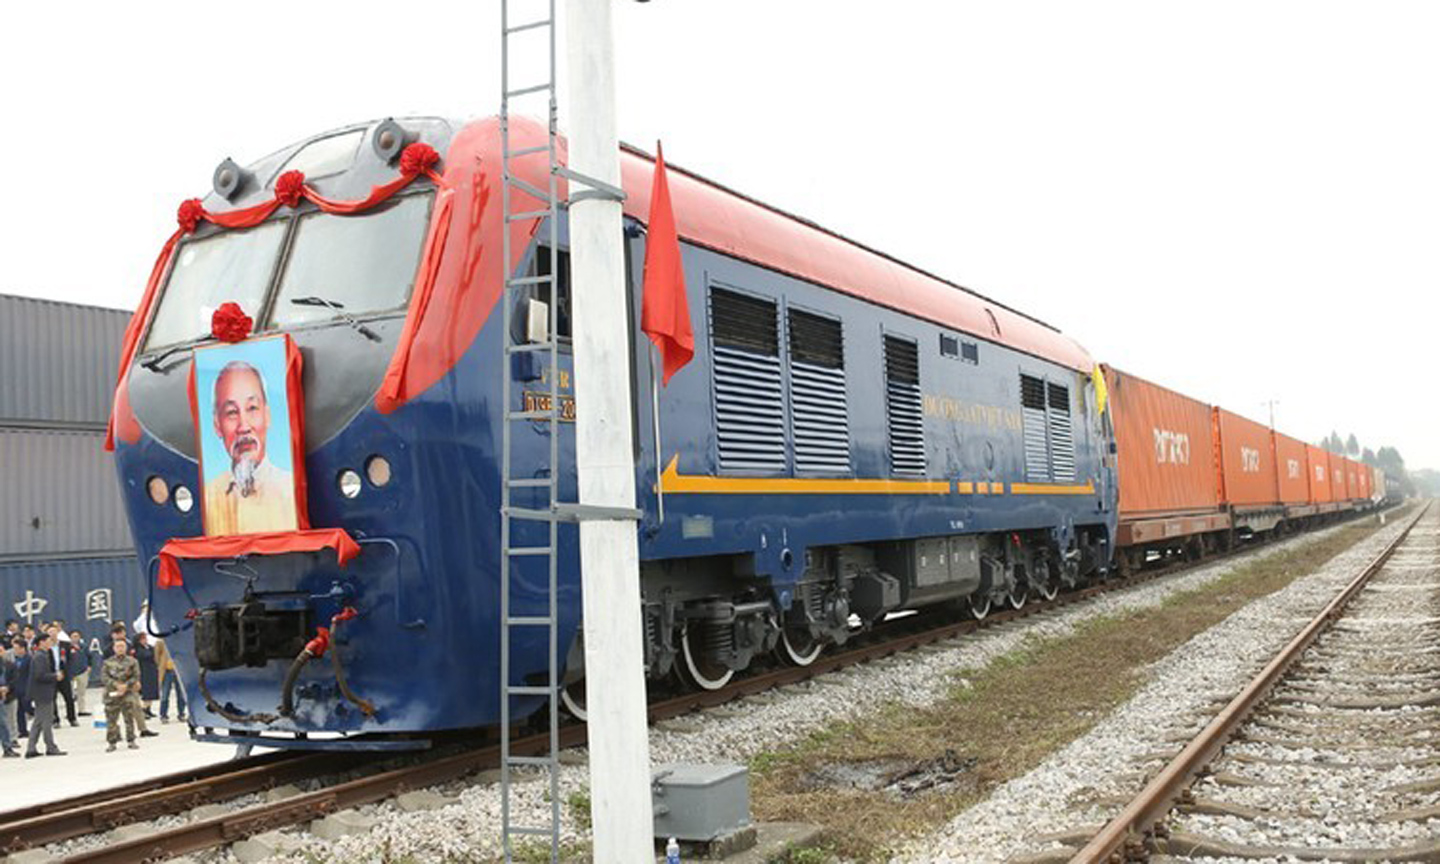 There will be a fleet of trains running from Kep to Dong Dang Station in the border province of Lang Son and then to China’s Pingxiang Station.